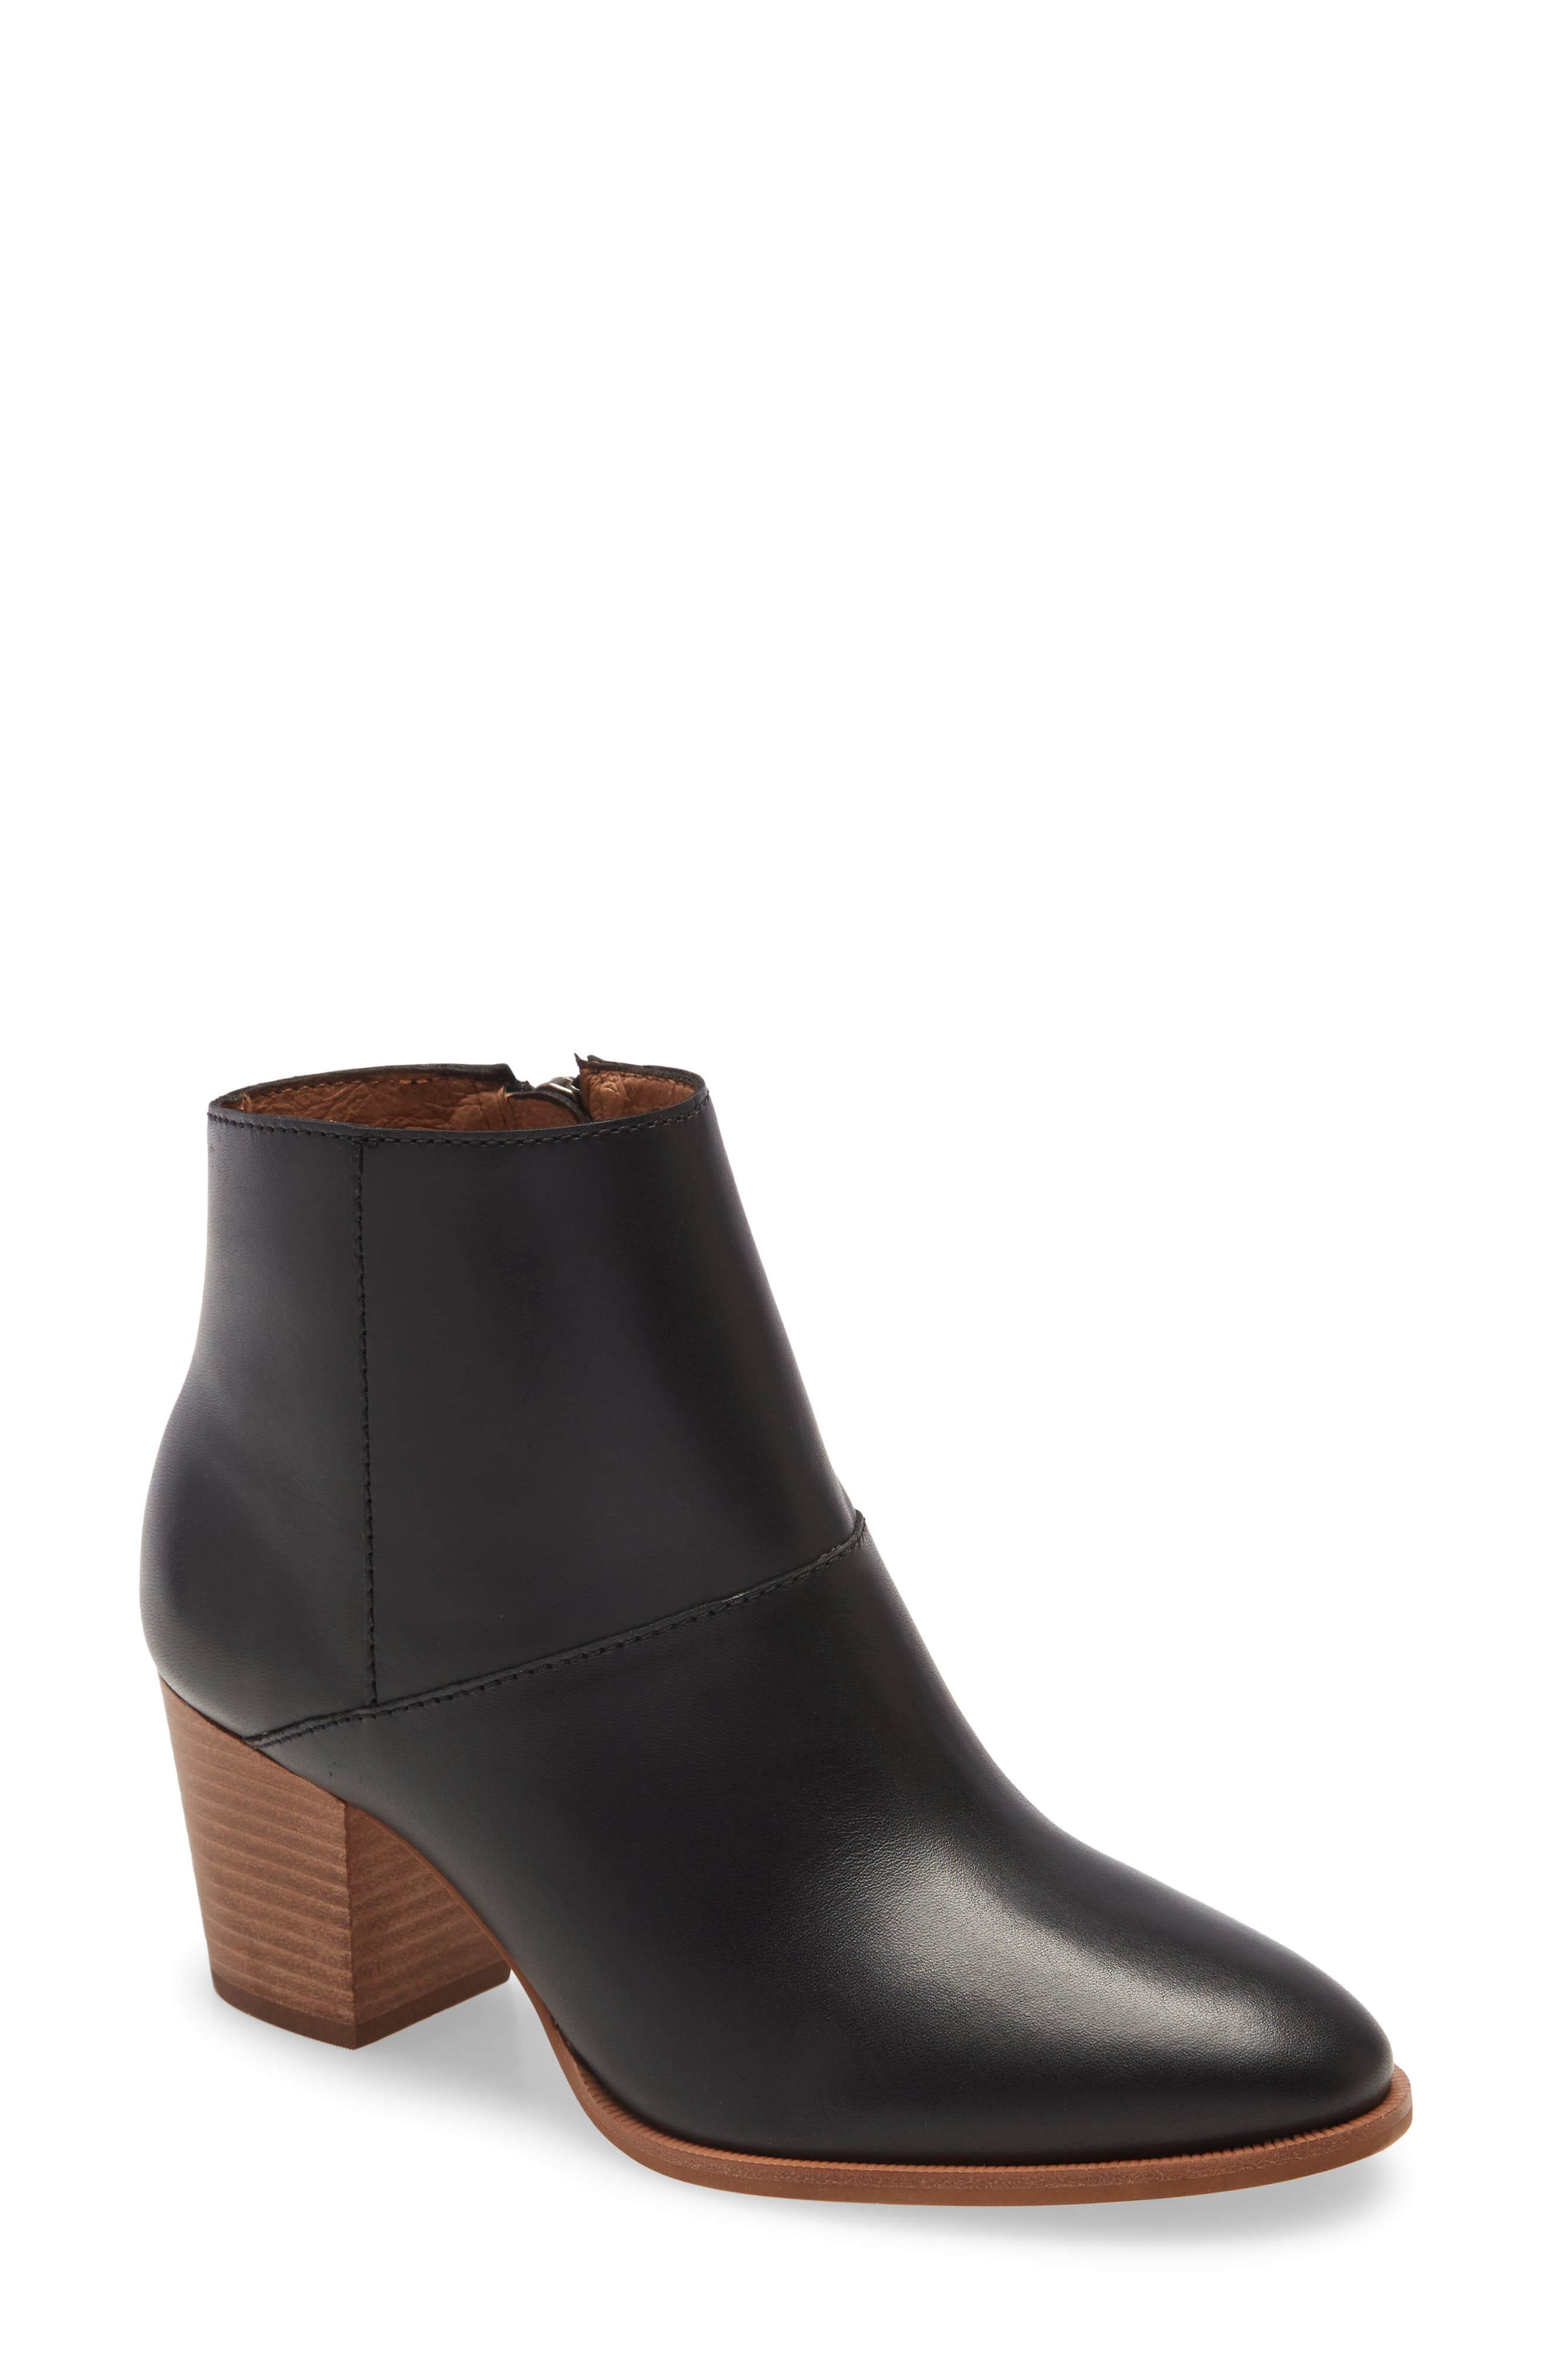 Women's Madewell Boots | Nordstrom